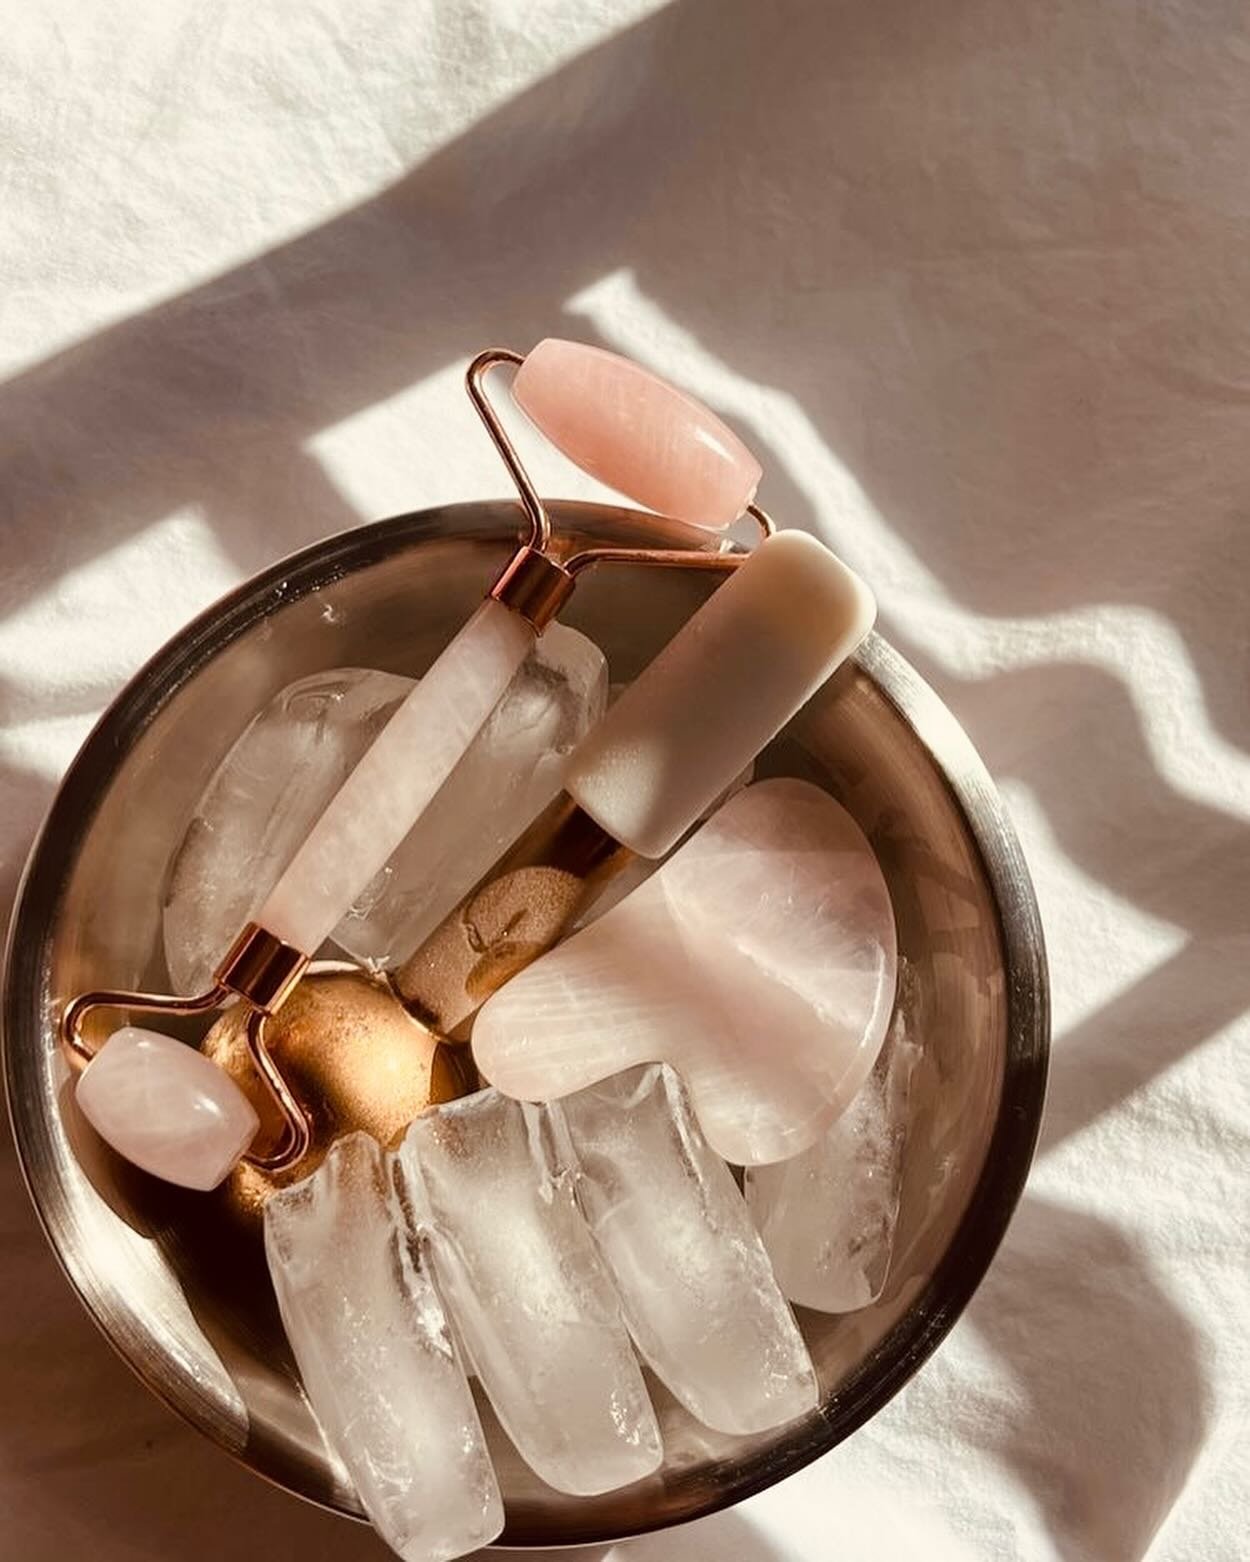 What are the benefits of a gua sha or &ldquo;scraping&rdquo;? 

1. Improves skin health
2. Improves blood circulation 
3. Boosts the immune system 
4. Reduces stress and promotes relaxation 
5. Reduces muscle tension and soreness 

Book your appointm